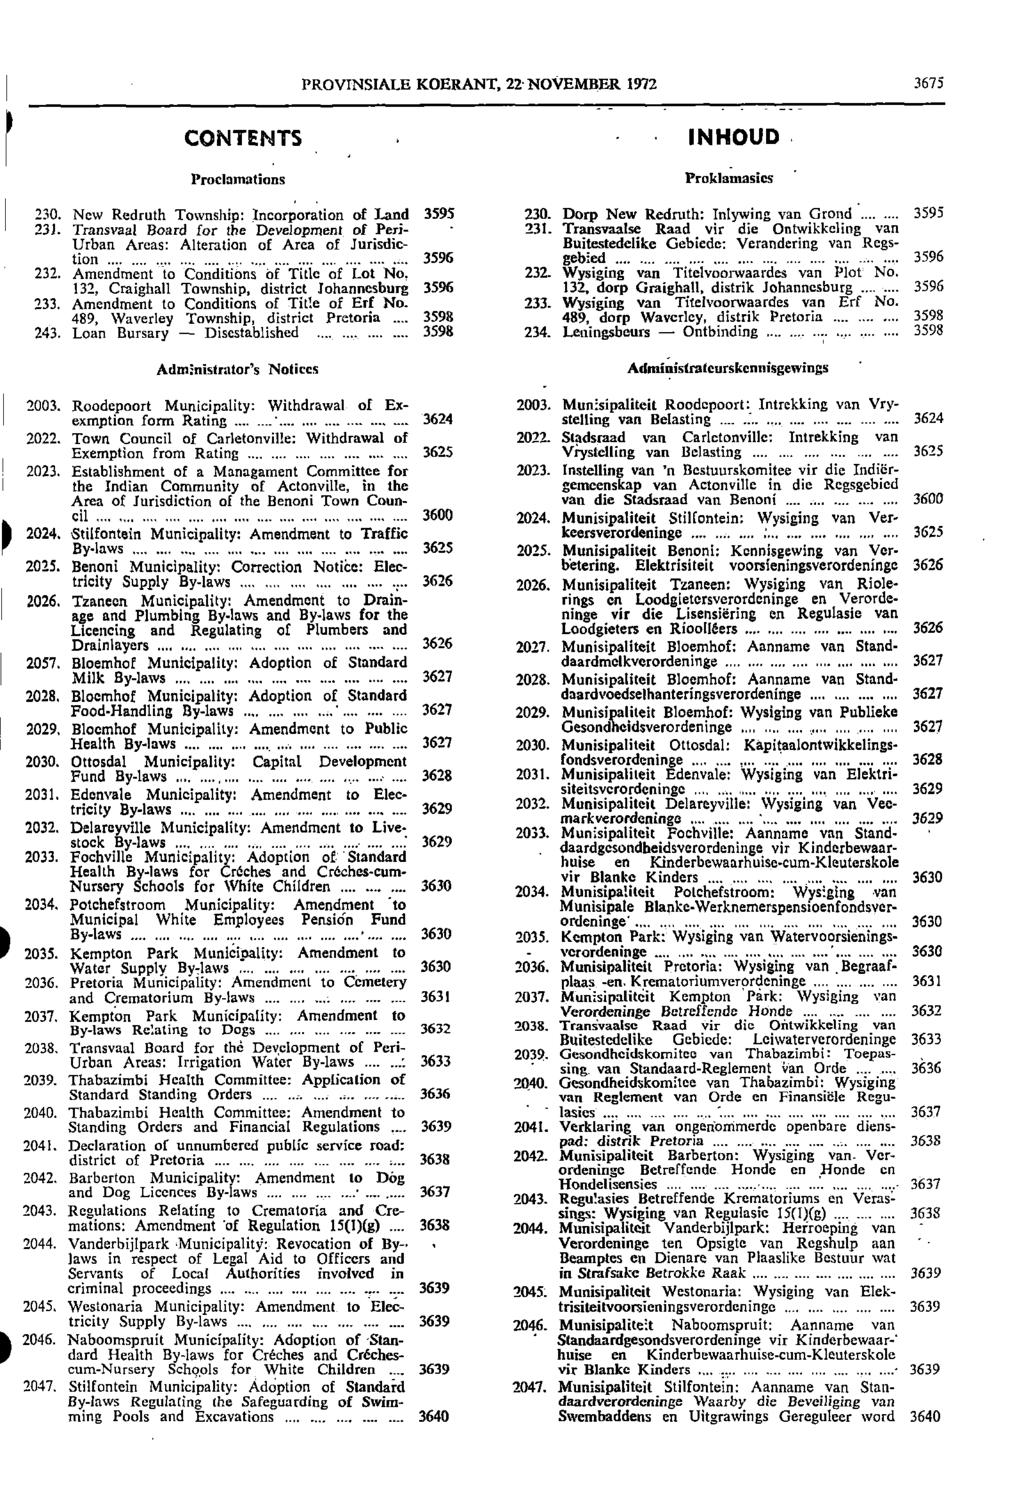 I Health 1 the PROVINSIALE KOERANT, 22 NOVEMBER 1972 3675 CONTENTS Proclamations INHOUD Proklamasics, 230 New Redruth Township: Incorporation of Land 3595 230 Dorp New Redruth: Inlywing van Grond